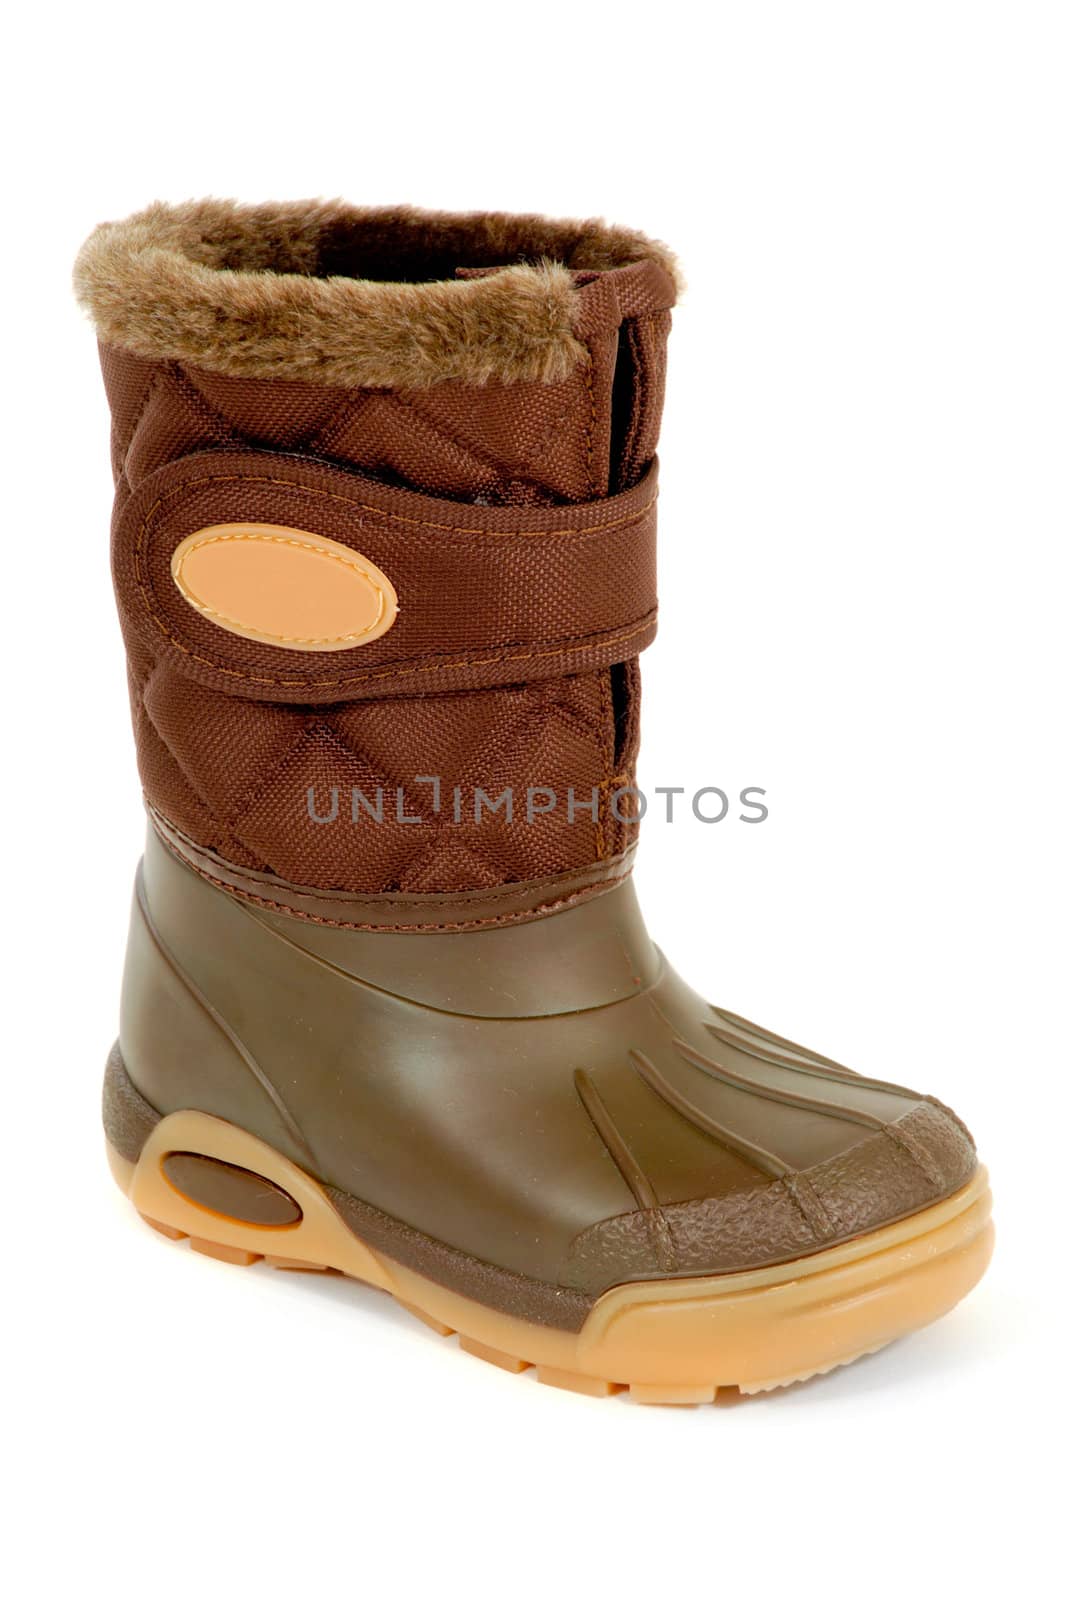 A green and brown winter boot taken on a white background.